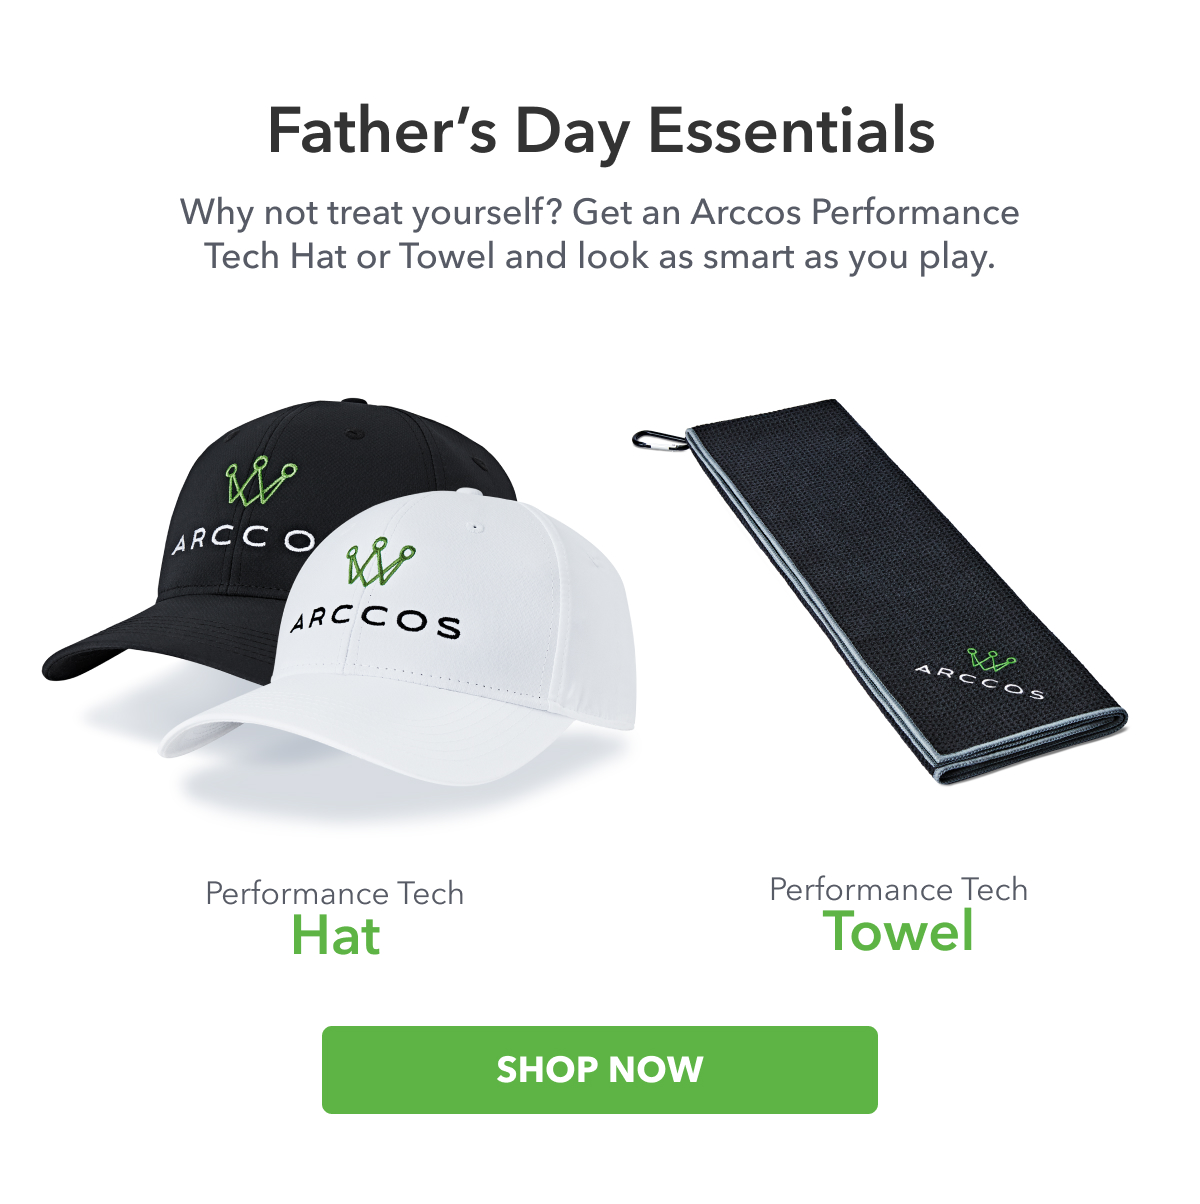 Shop Now for Father''s Day